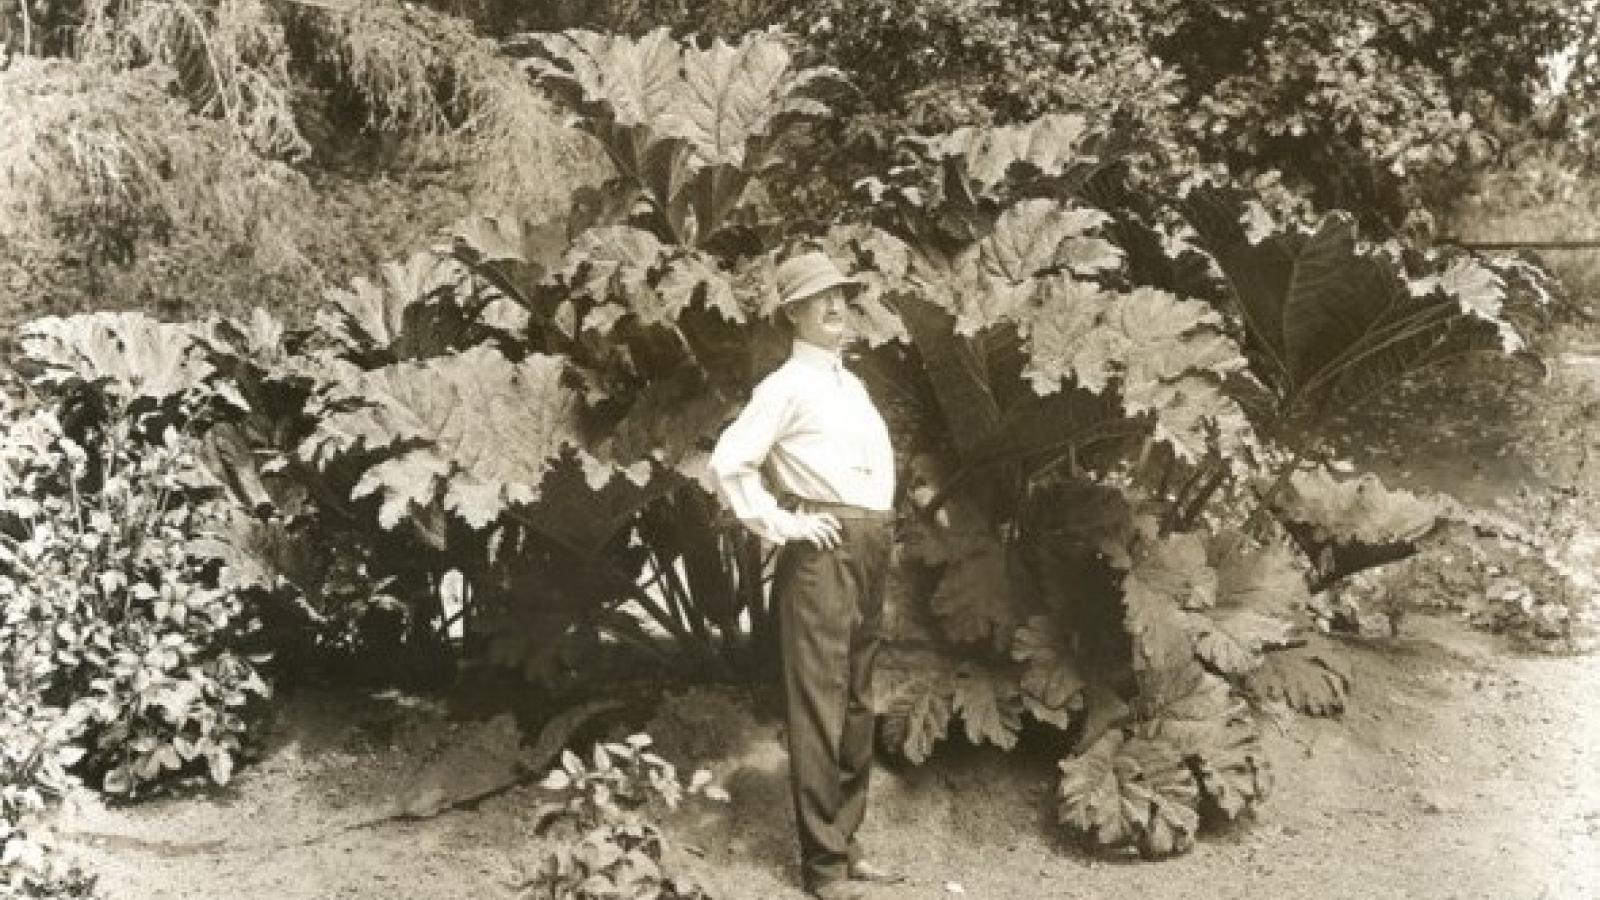 Tevis posing by one of his prized exotic plants, a giant gunnera from Brazil. (Image from Los Gatos Library, Novitiate Collection)